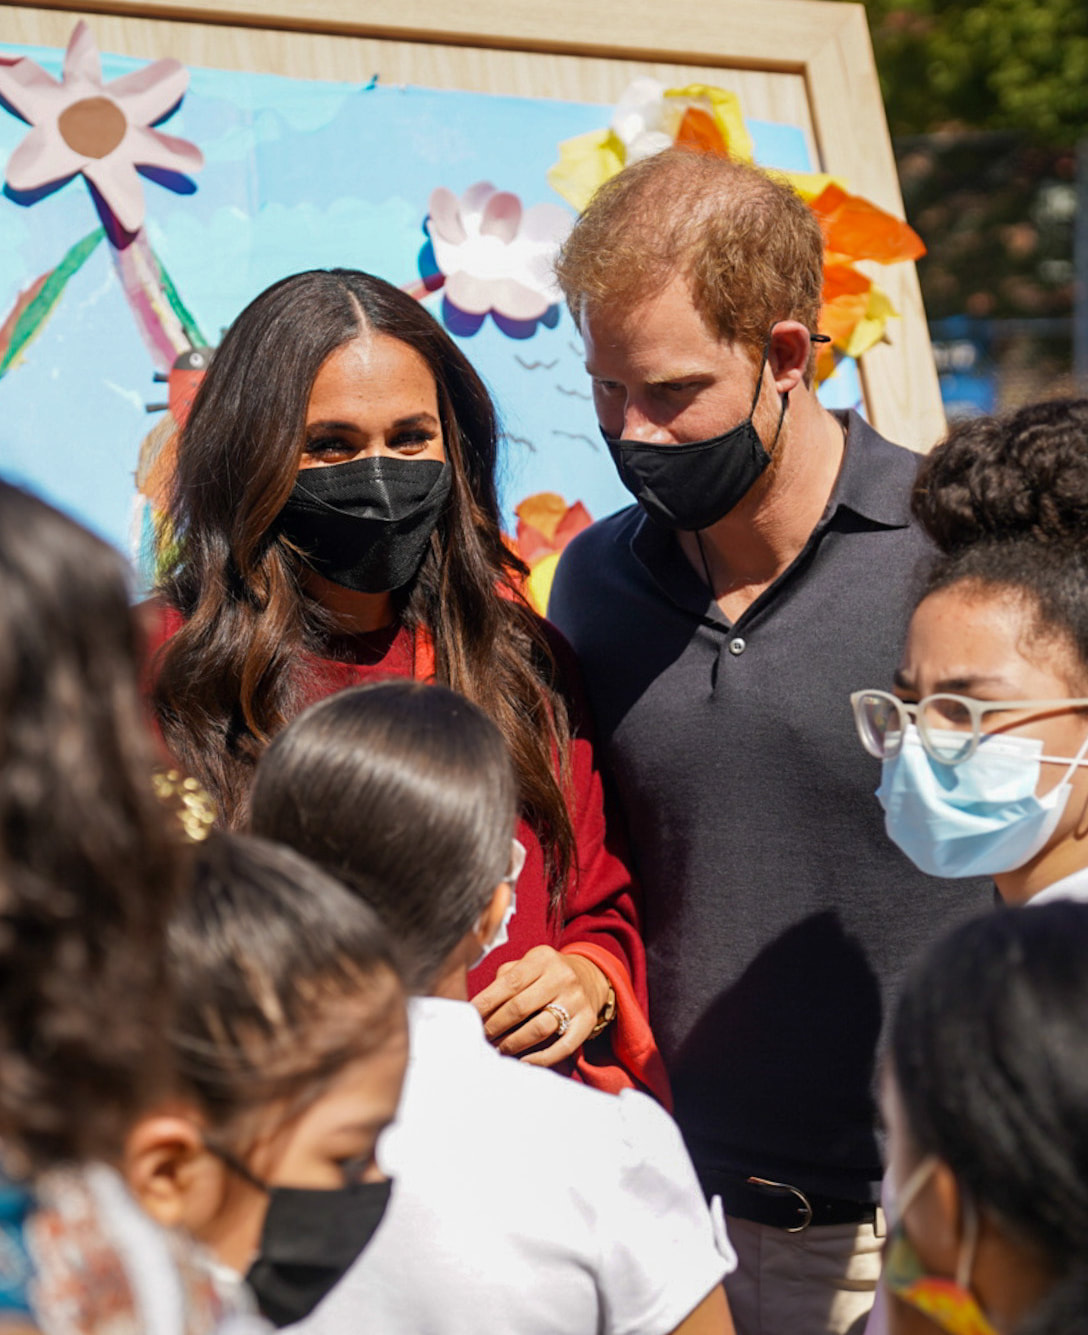 The Duke and ​Duchess of Sussex commenced their second day in New York City with a visit to Harlem's Mahalia Jackson M123 Community School. 